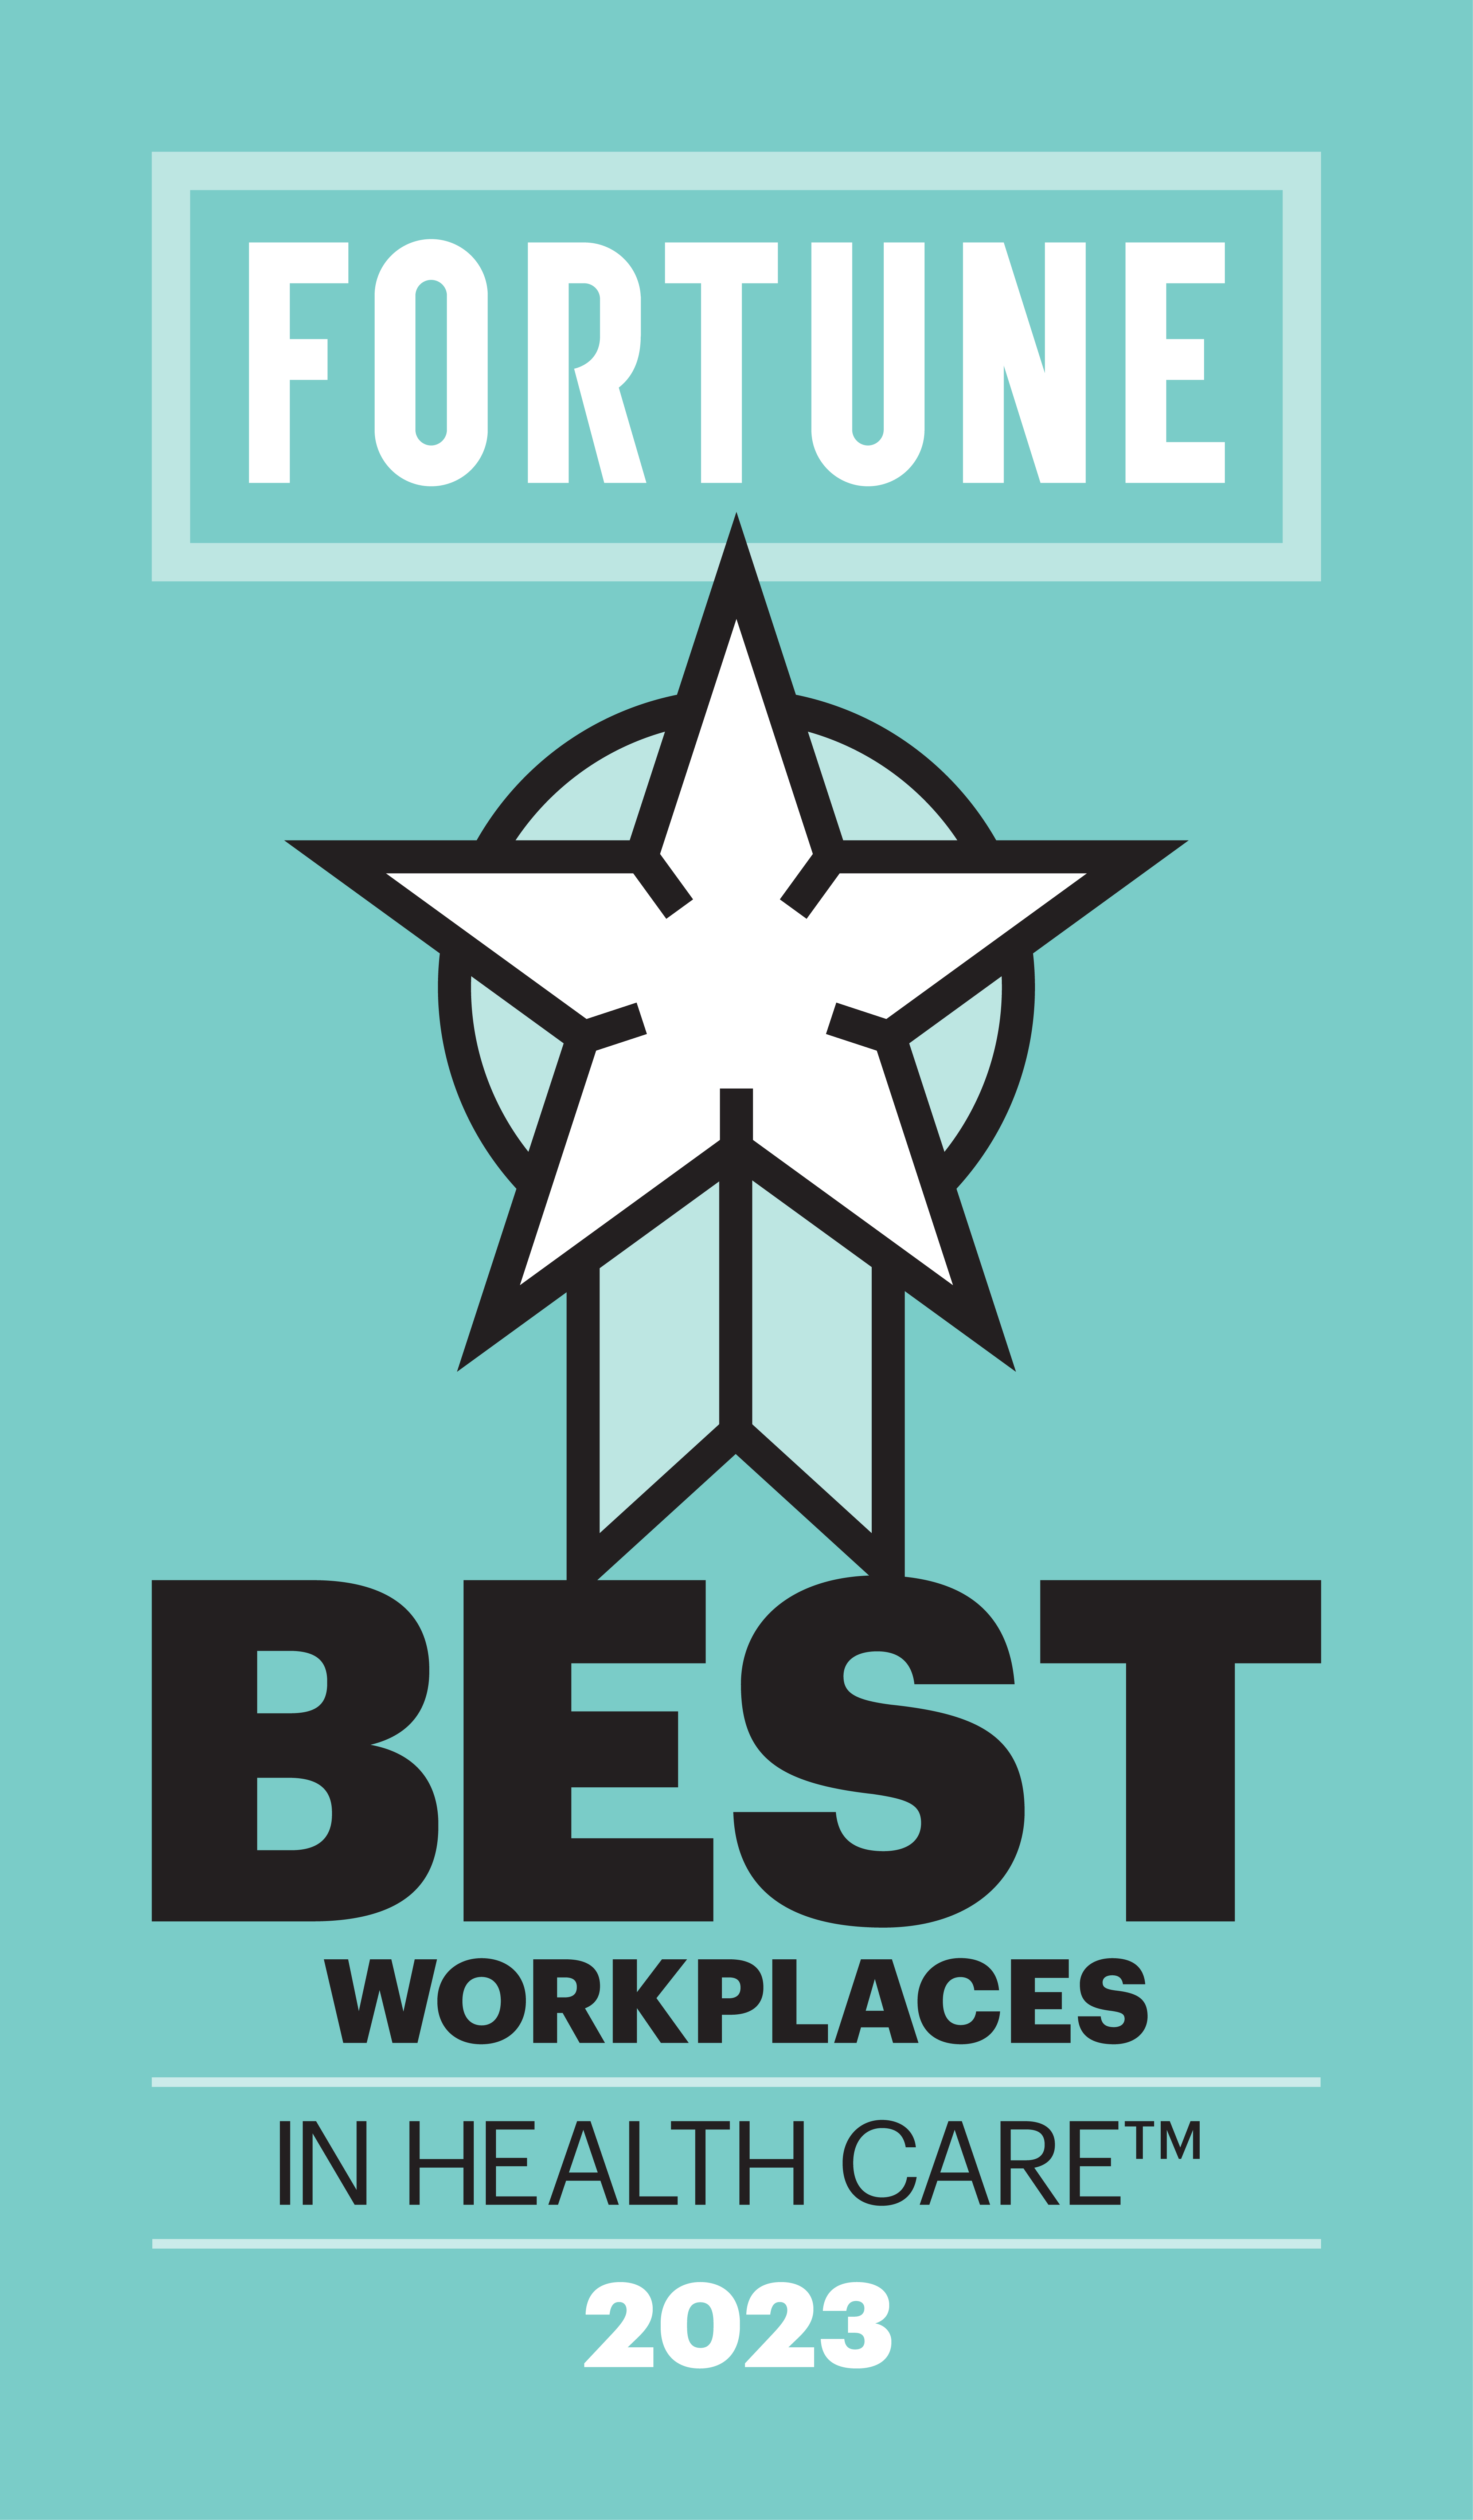 Fortune's Best Workplaces in Healthcare 2023 logo